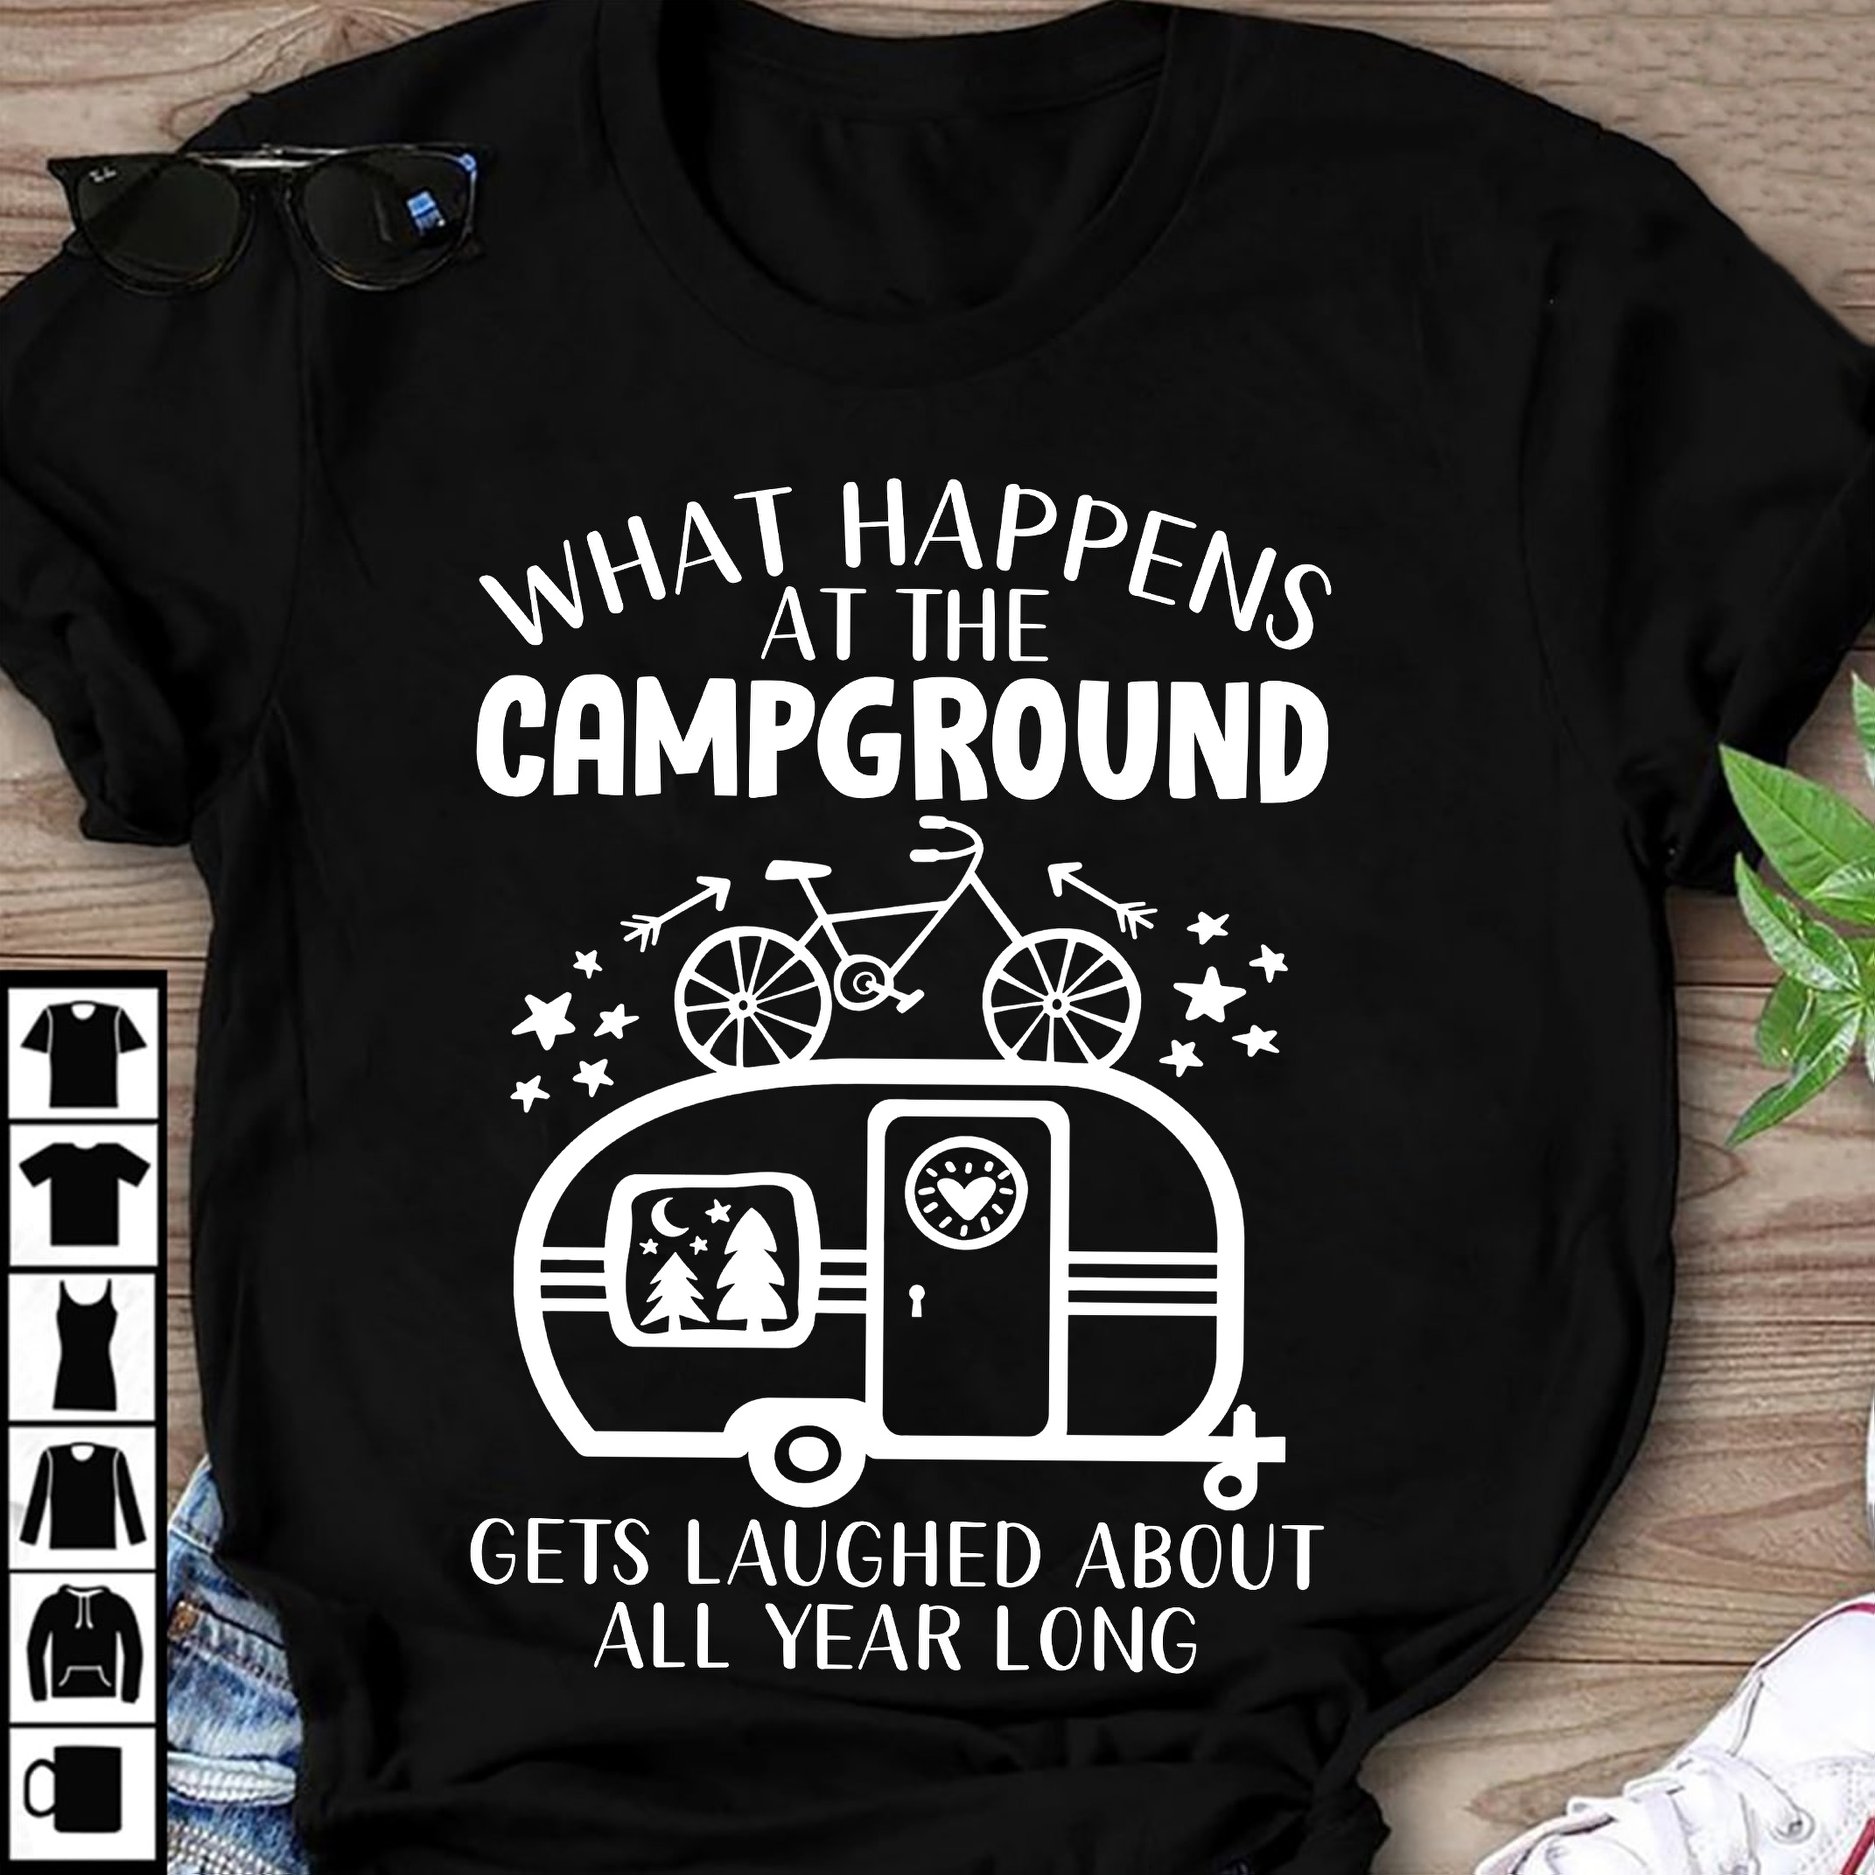 What happens at the campground gets laughed about all year long